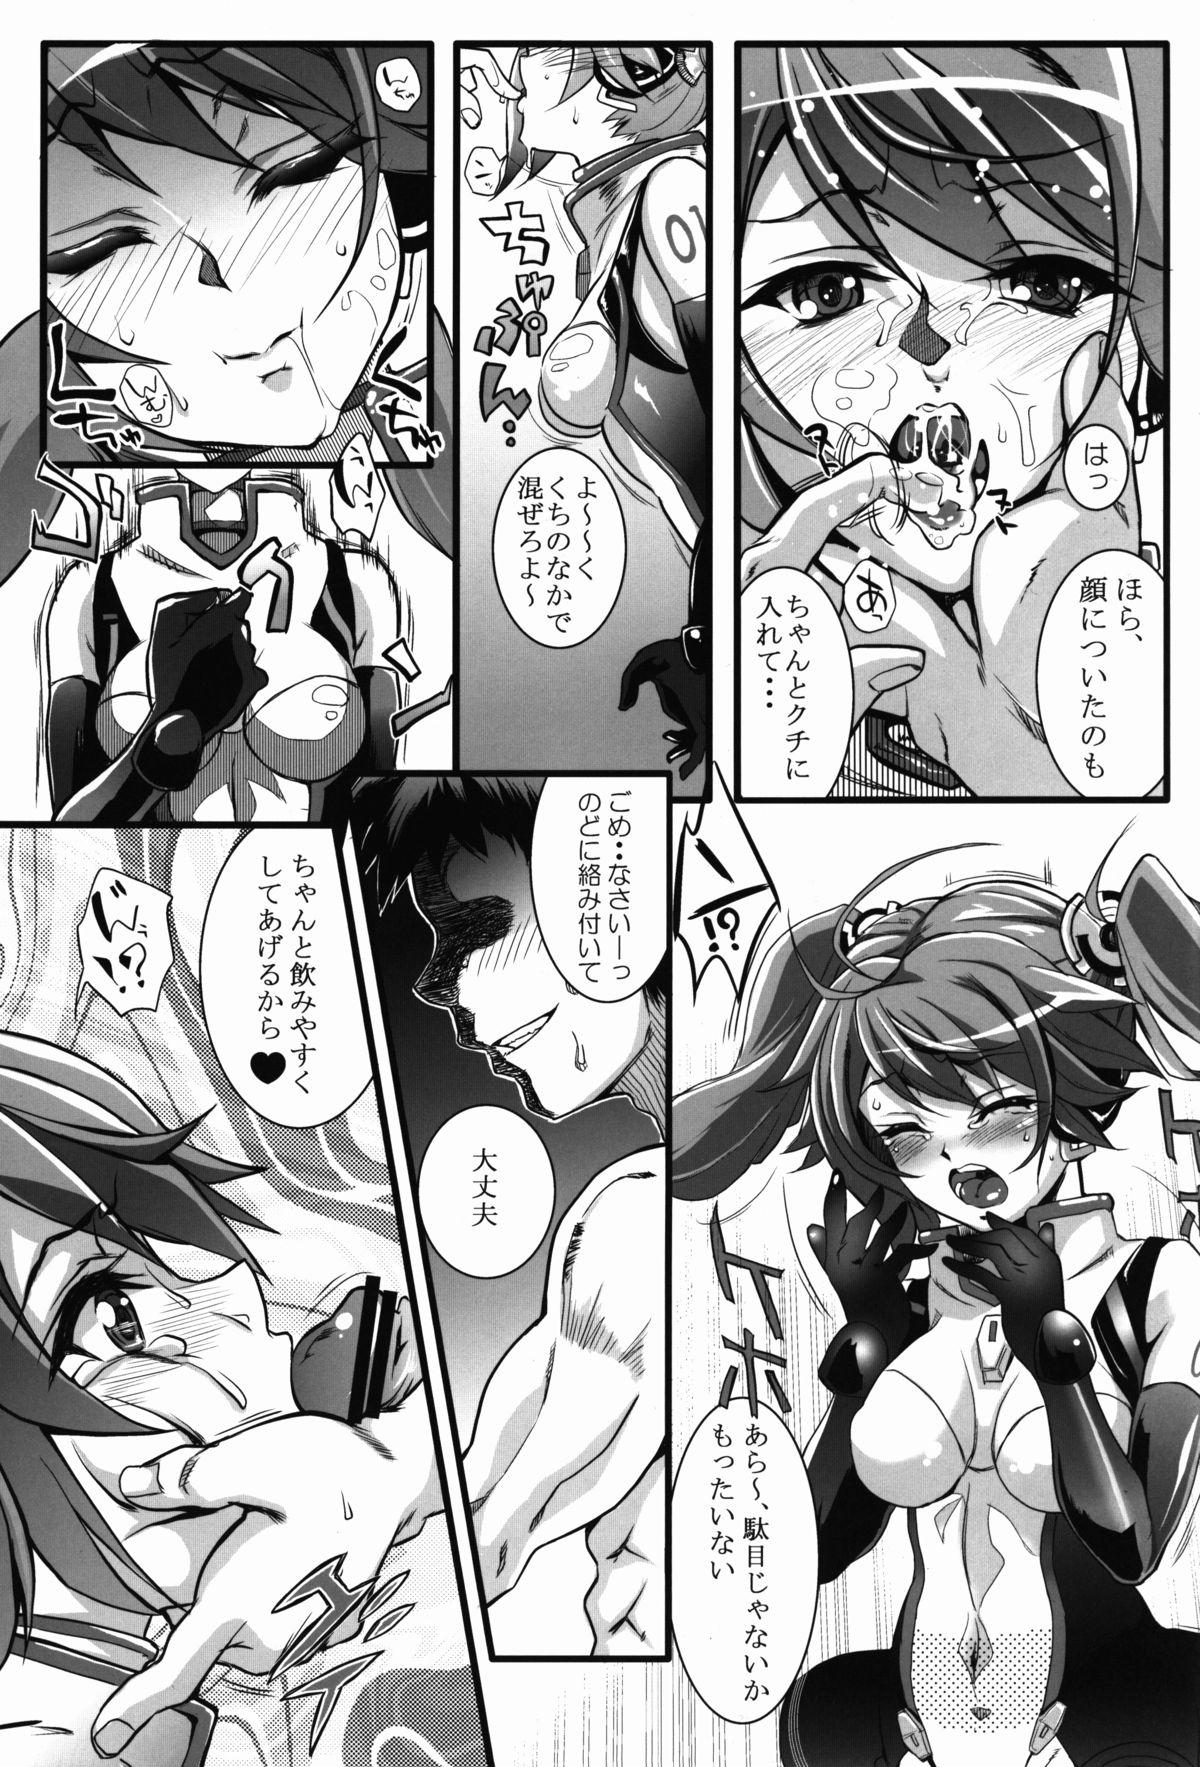 Stepfather Racing Angeloid - Vocaloid Blackwoman - Page 11